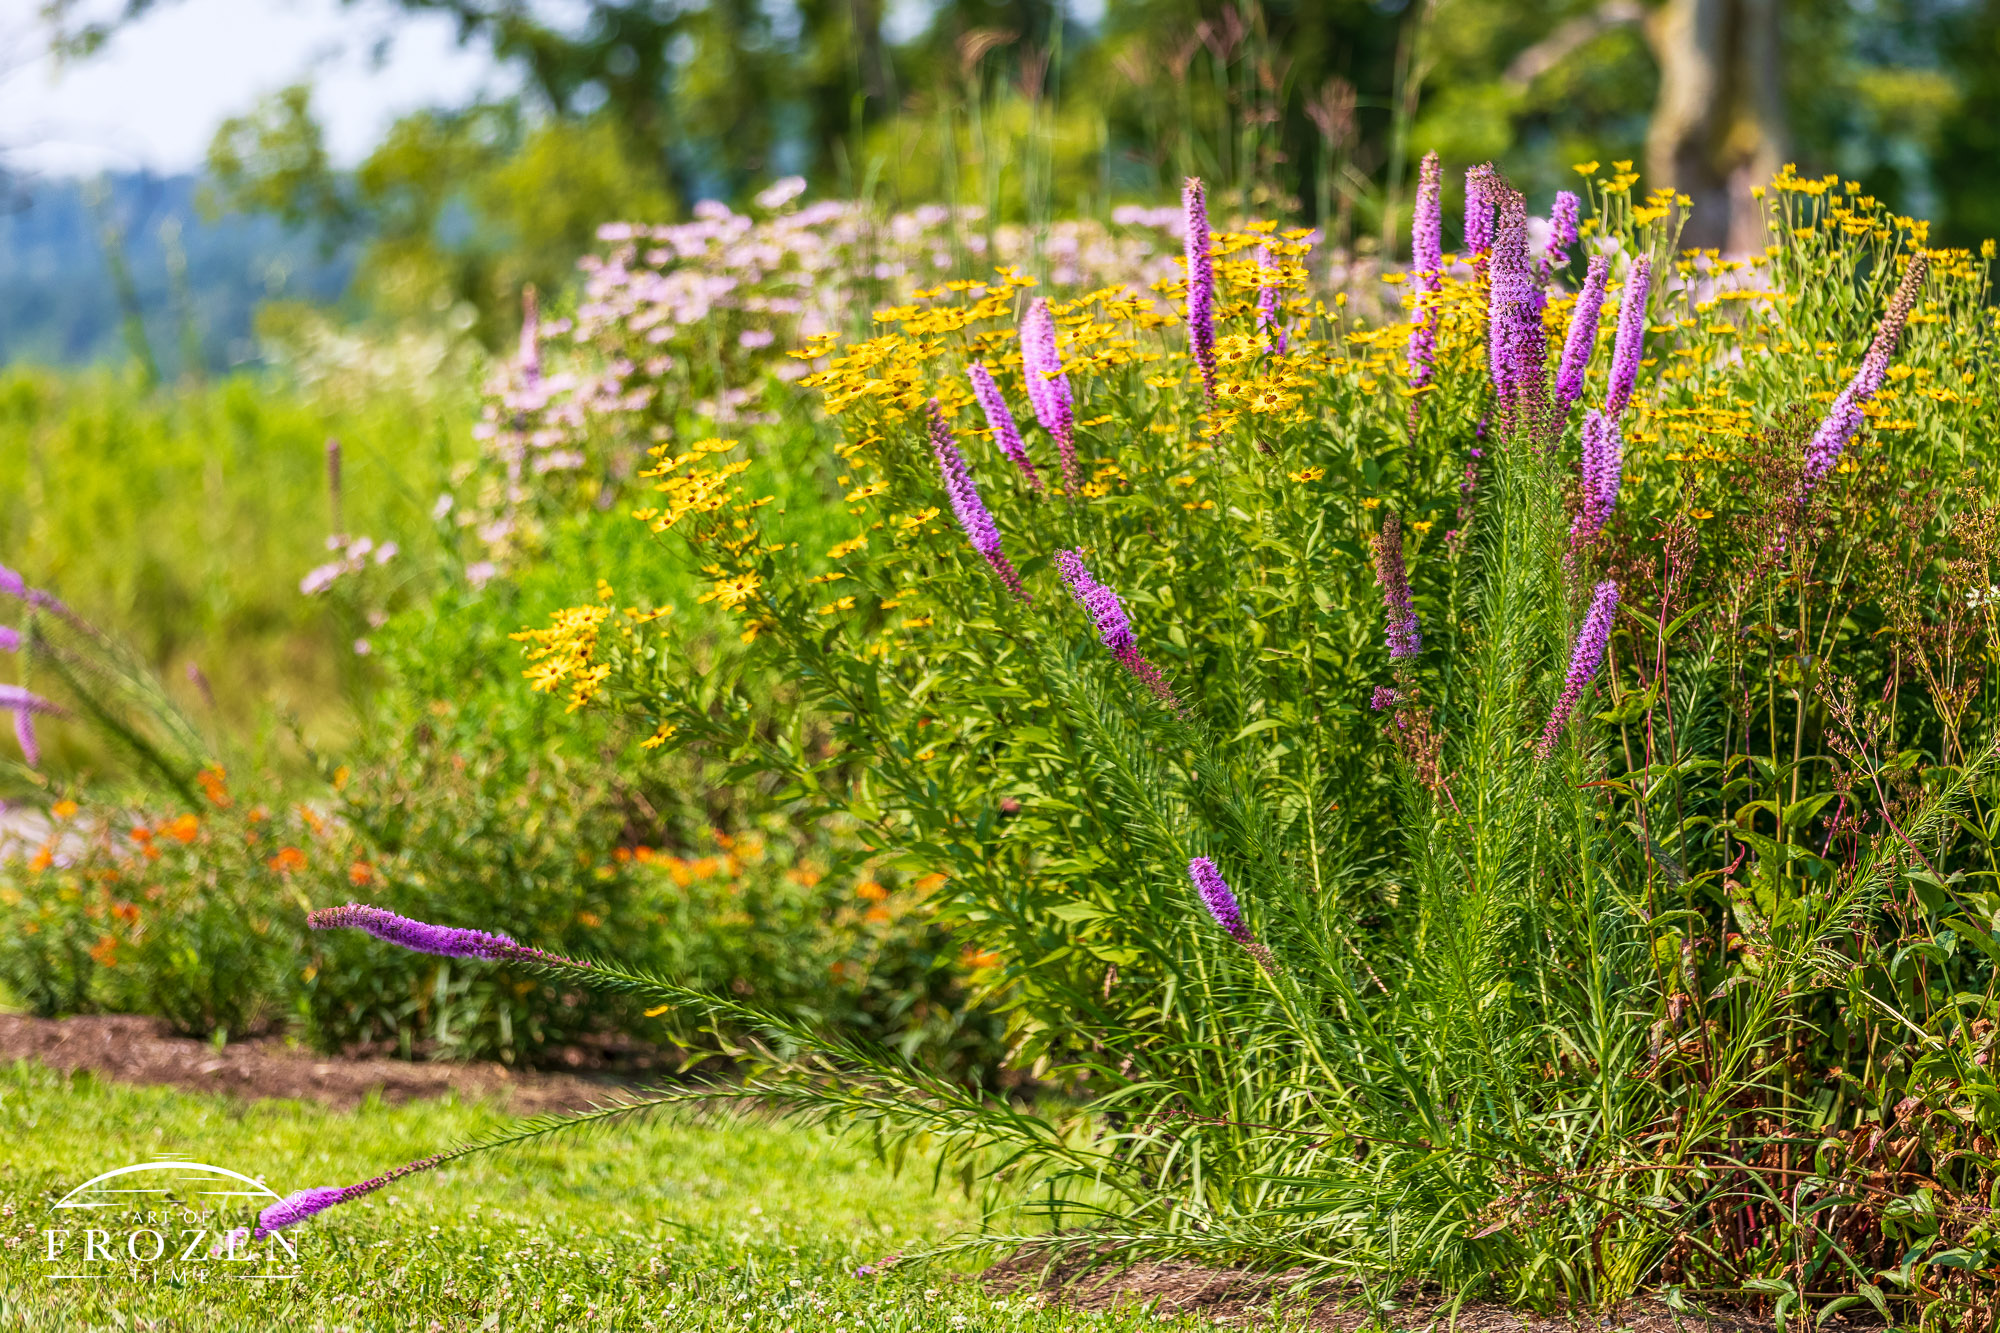 A color flowerbed of Black-eyed Susans and Blazing Star flower